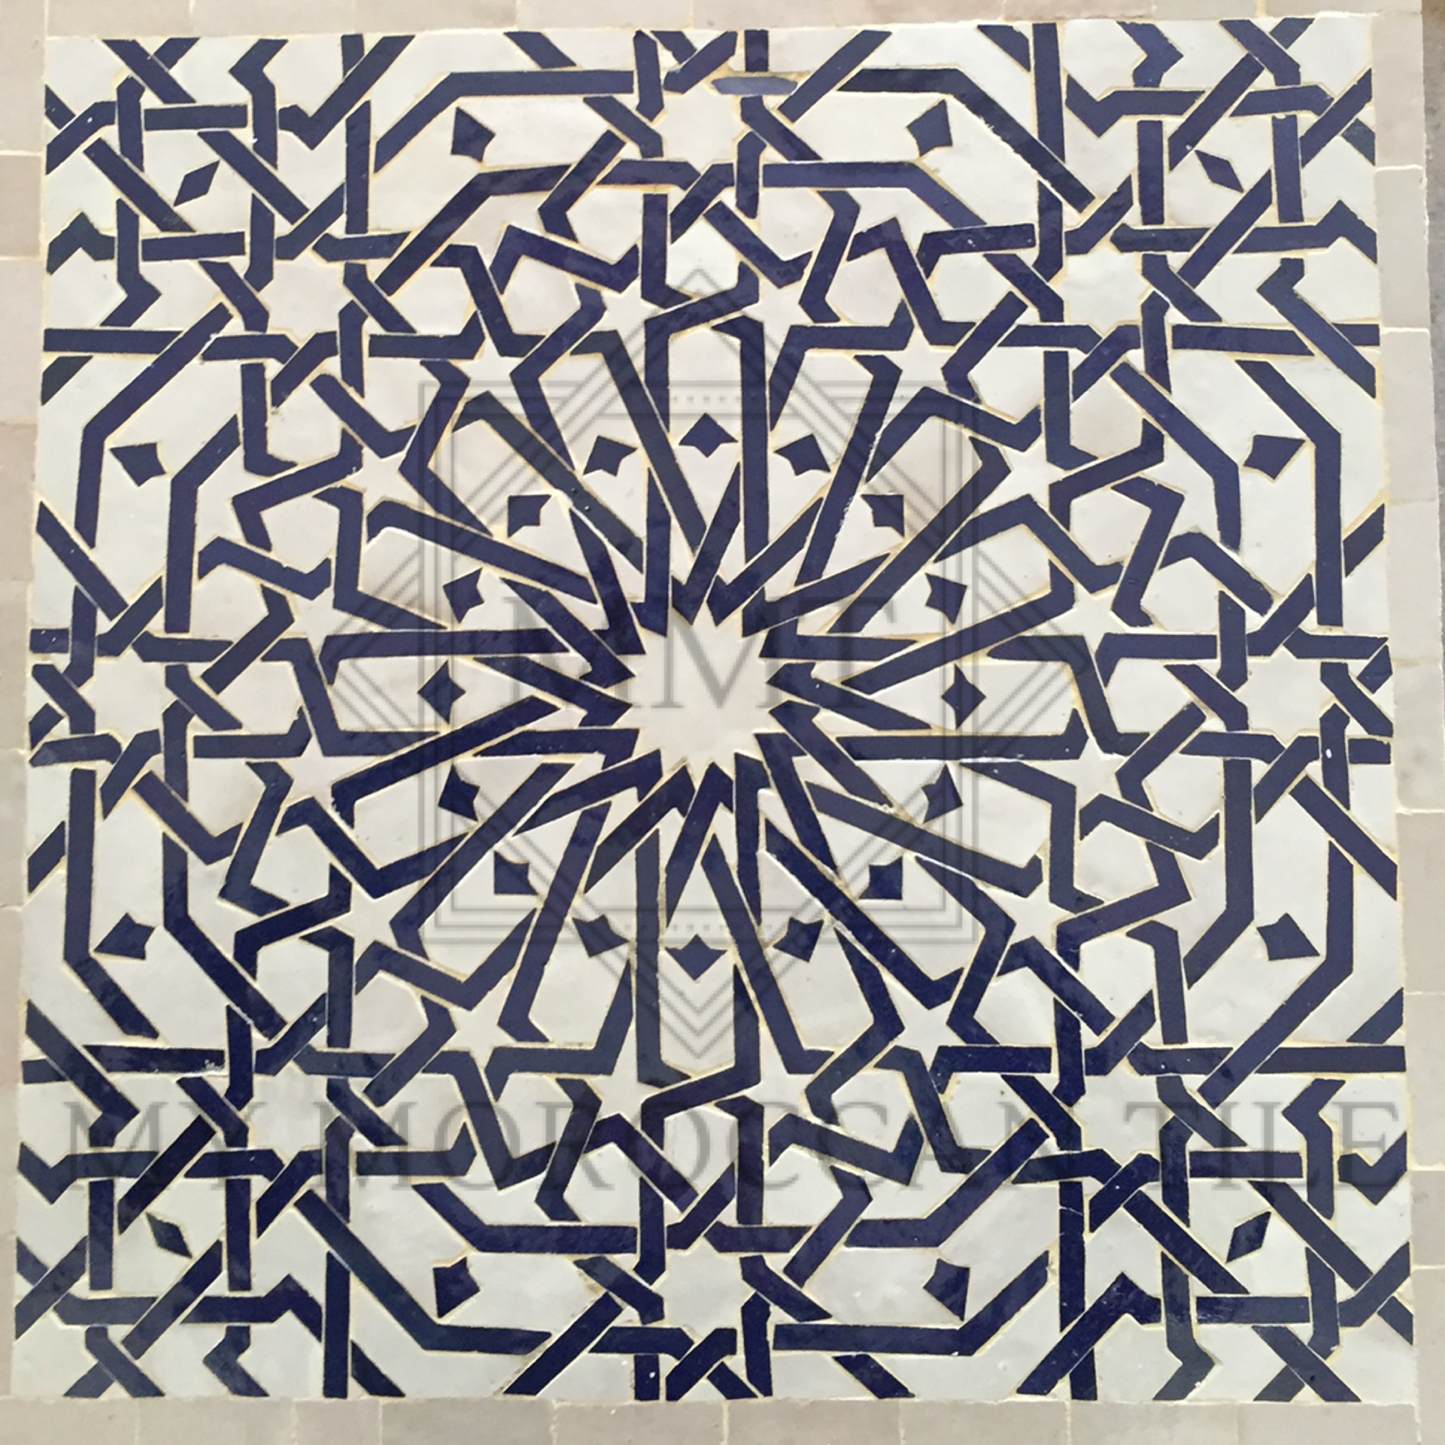 Alhambra sixteen pointed star Mosaic Tile